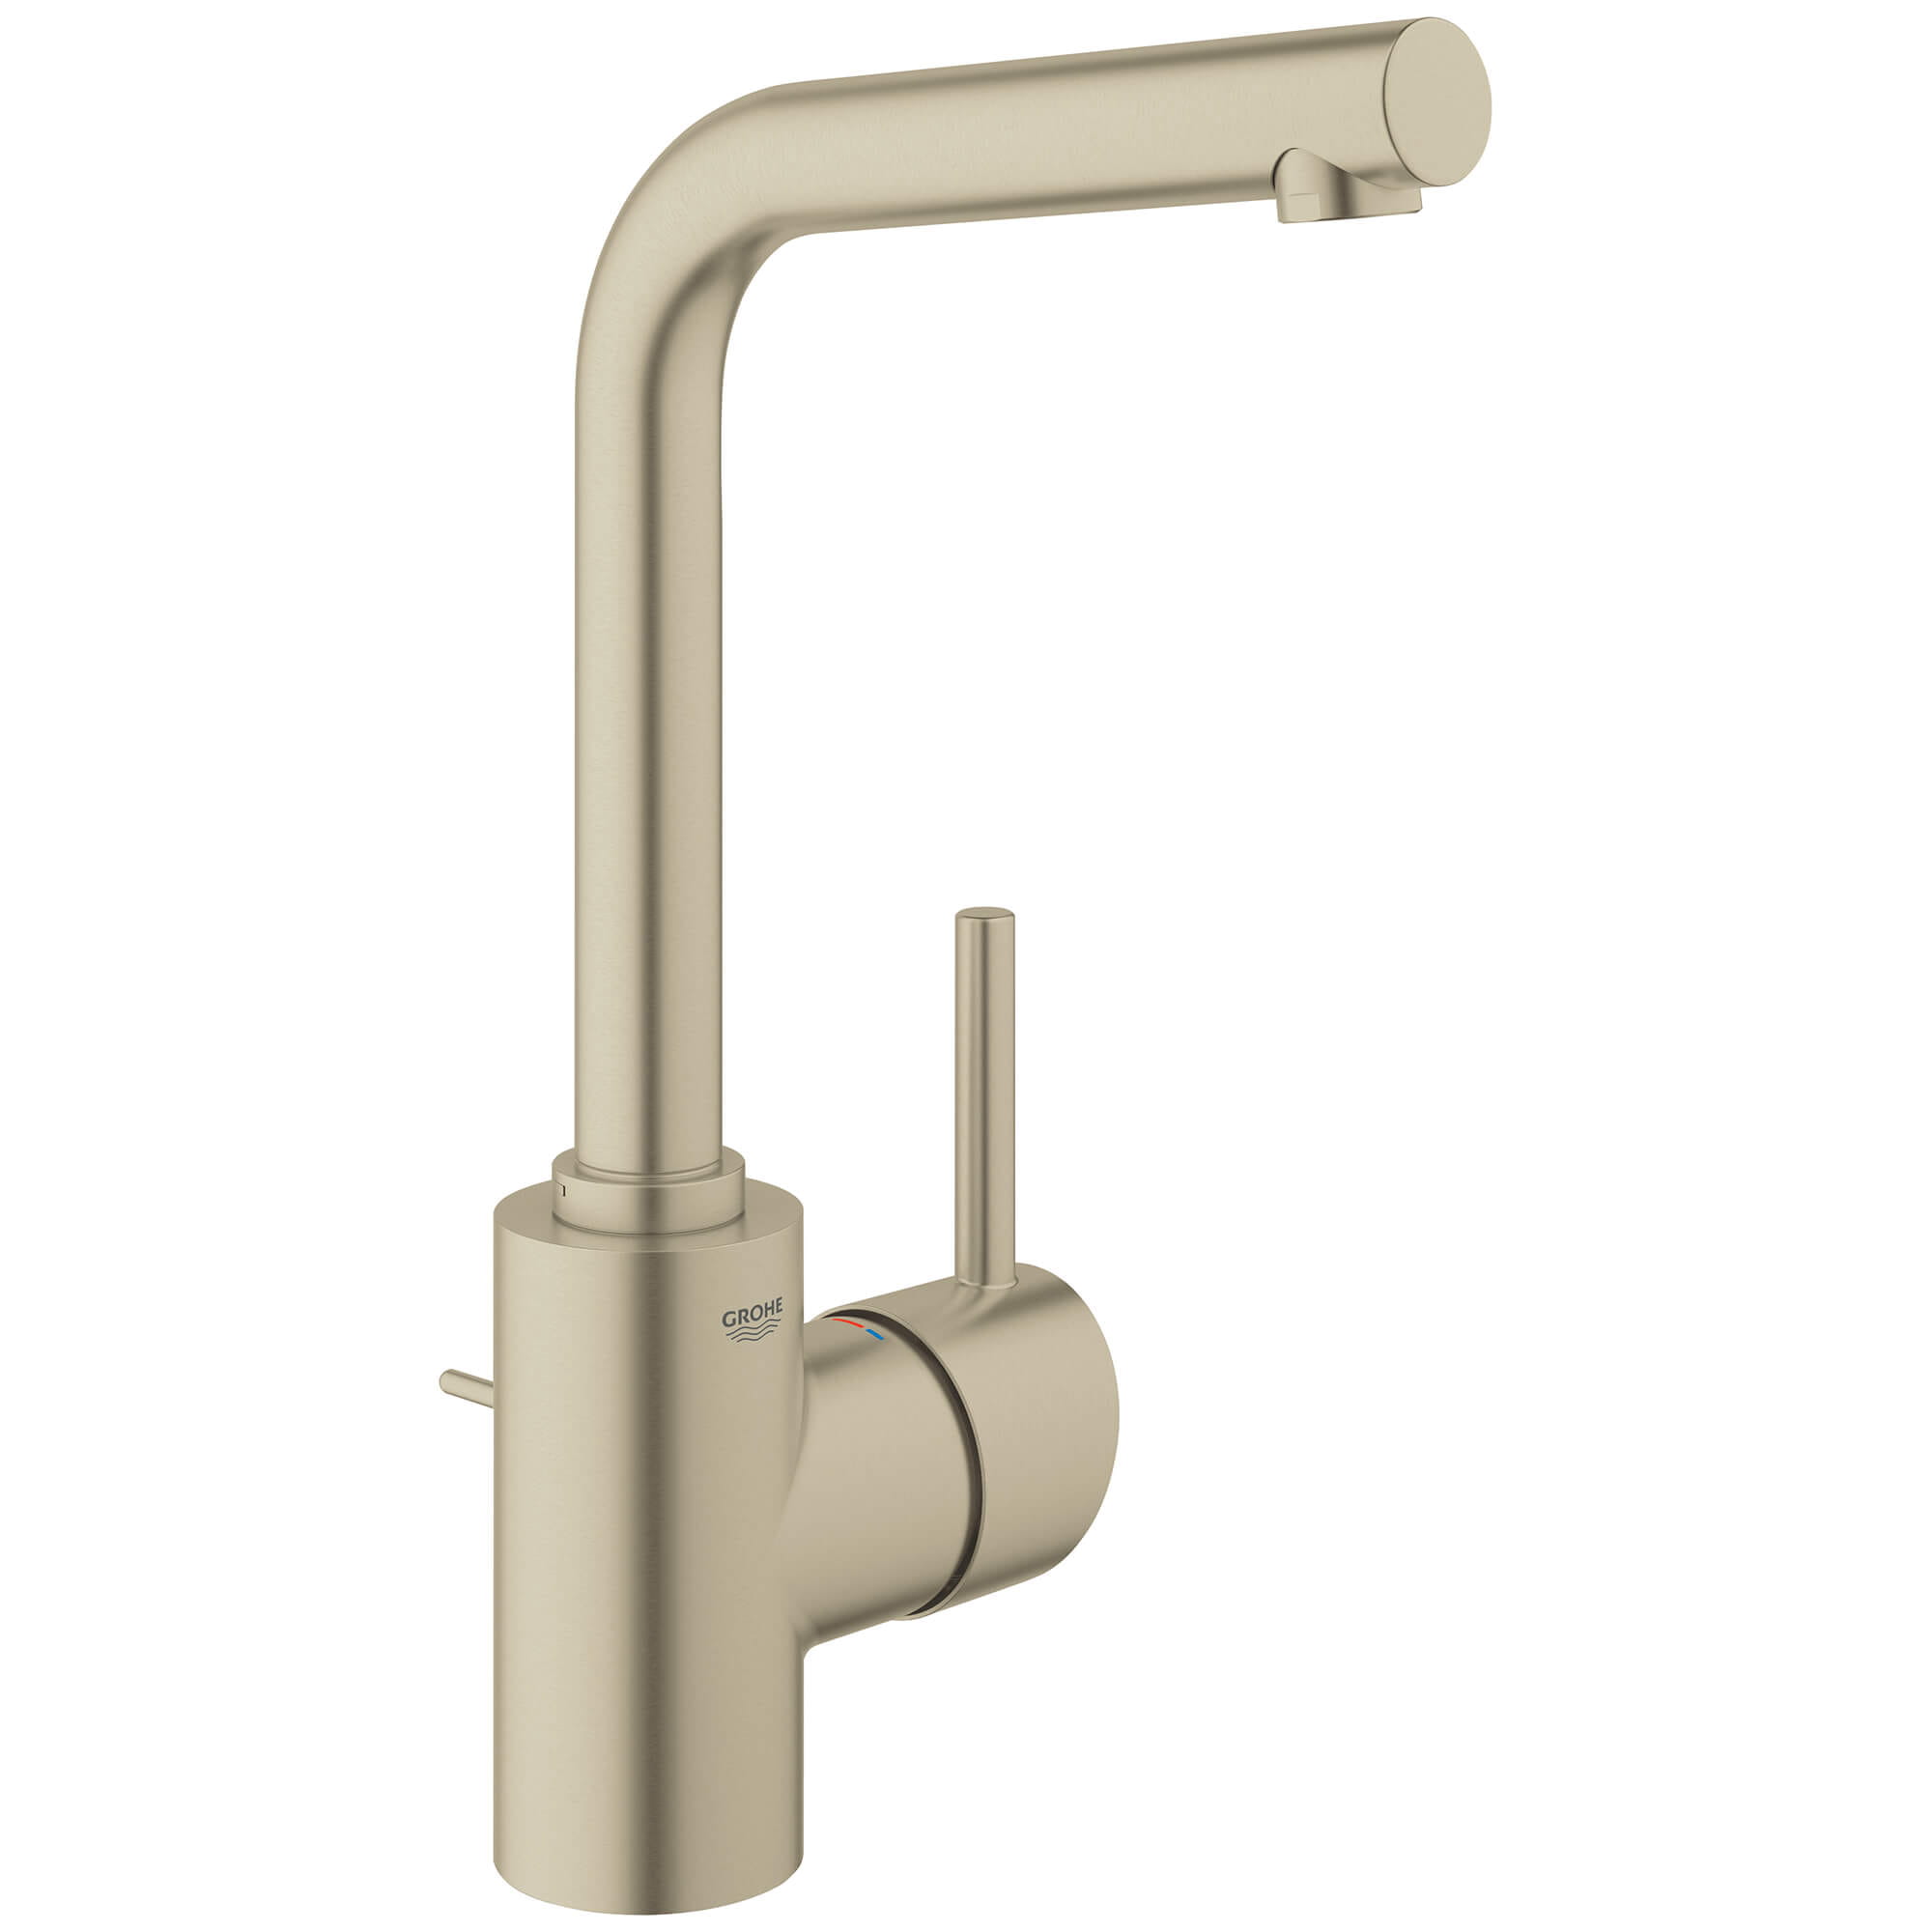 Robinet monotrou taille L GROHE BRUSHED NICKEL